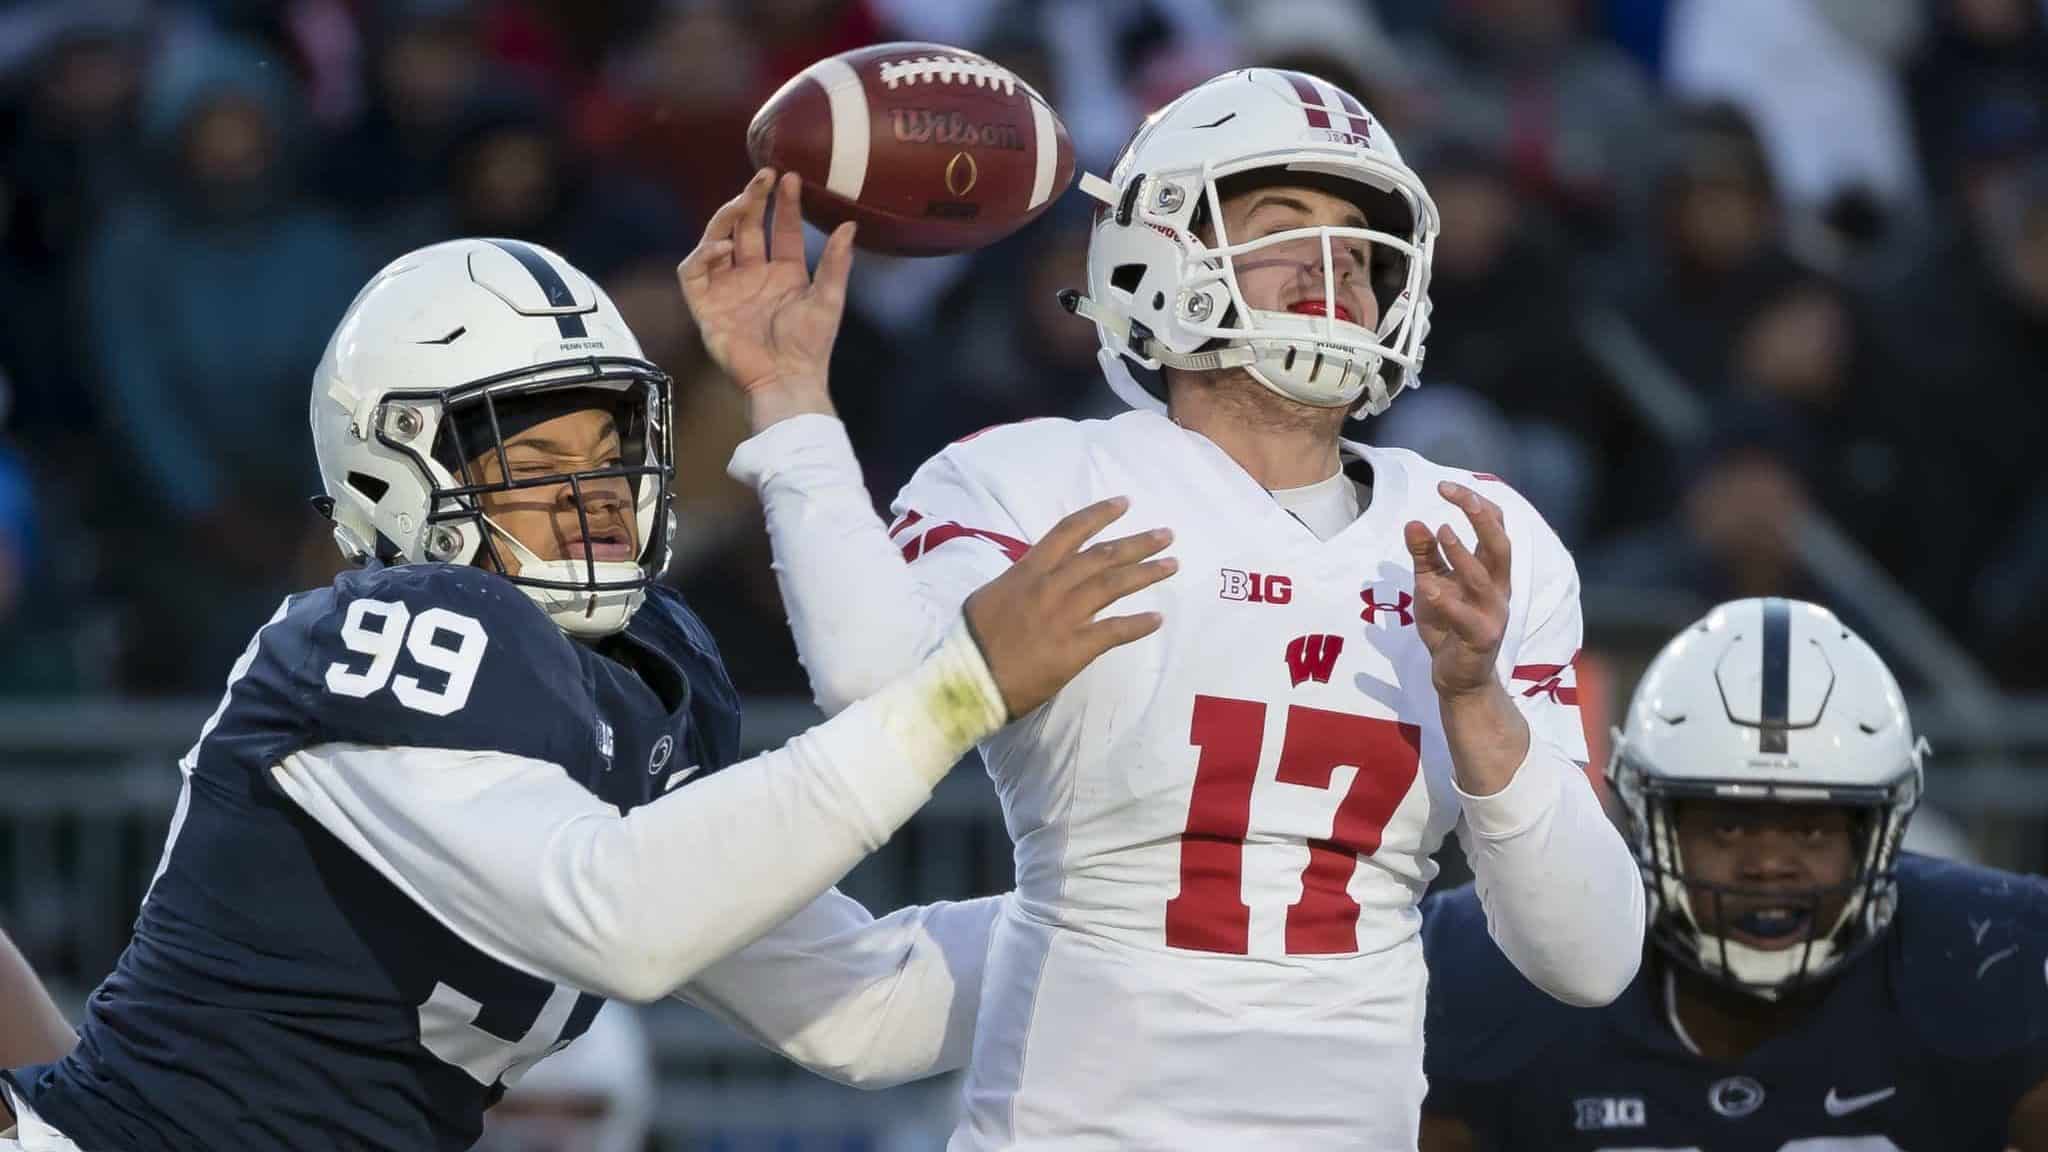 STATE COLLEGE, PA - NOVEMBER 10: Yetur Gross-Matos #99 of the Penn State Nittany Lions hits the arm of Jack Coan #17 of the Wisconsin Badgers as he throws during the second half at Beaver Stadium on November 10, 2018 in State College, Pennsylvania.